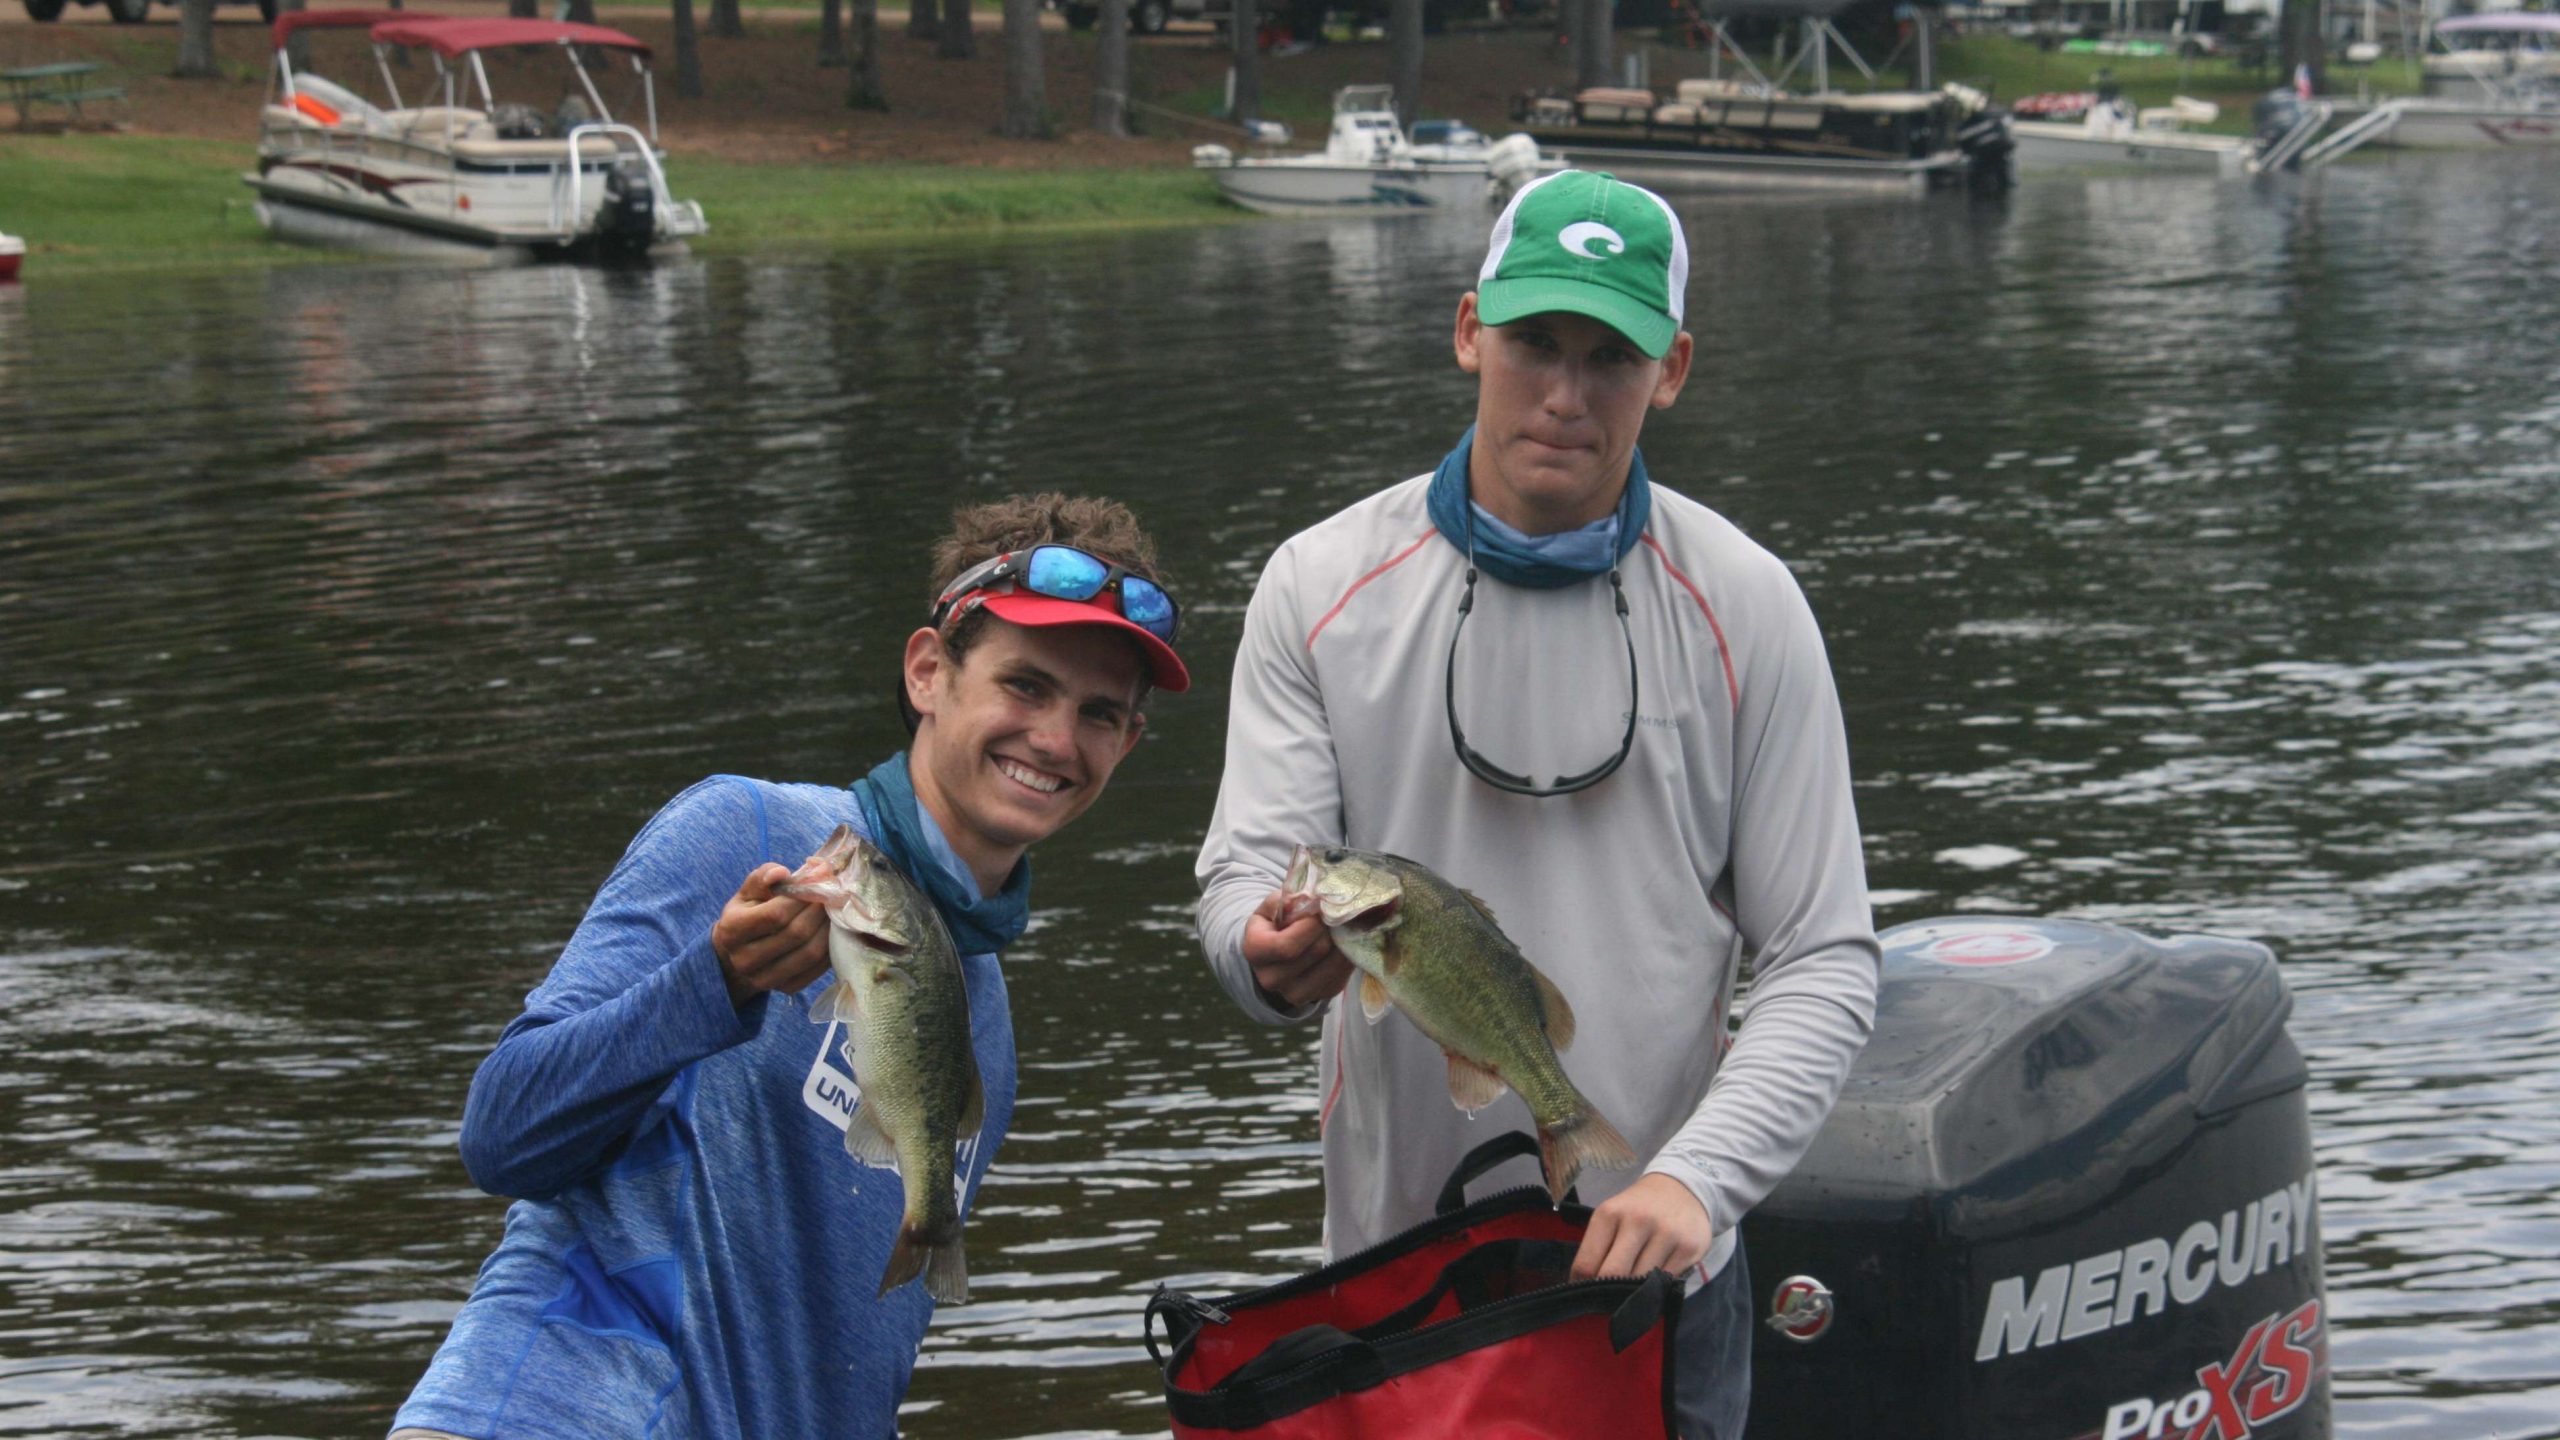 Dayten Schureman and Tommy Sendek came all the way from Arizona to compete. They caught three fish that totaled 4-10, and were all smiles upon arriving at the docks.